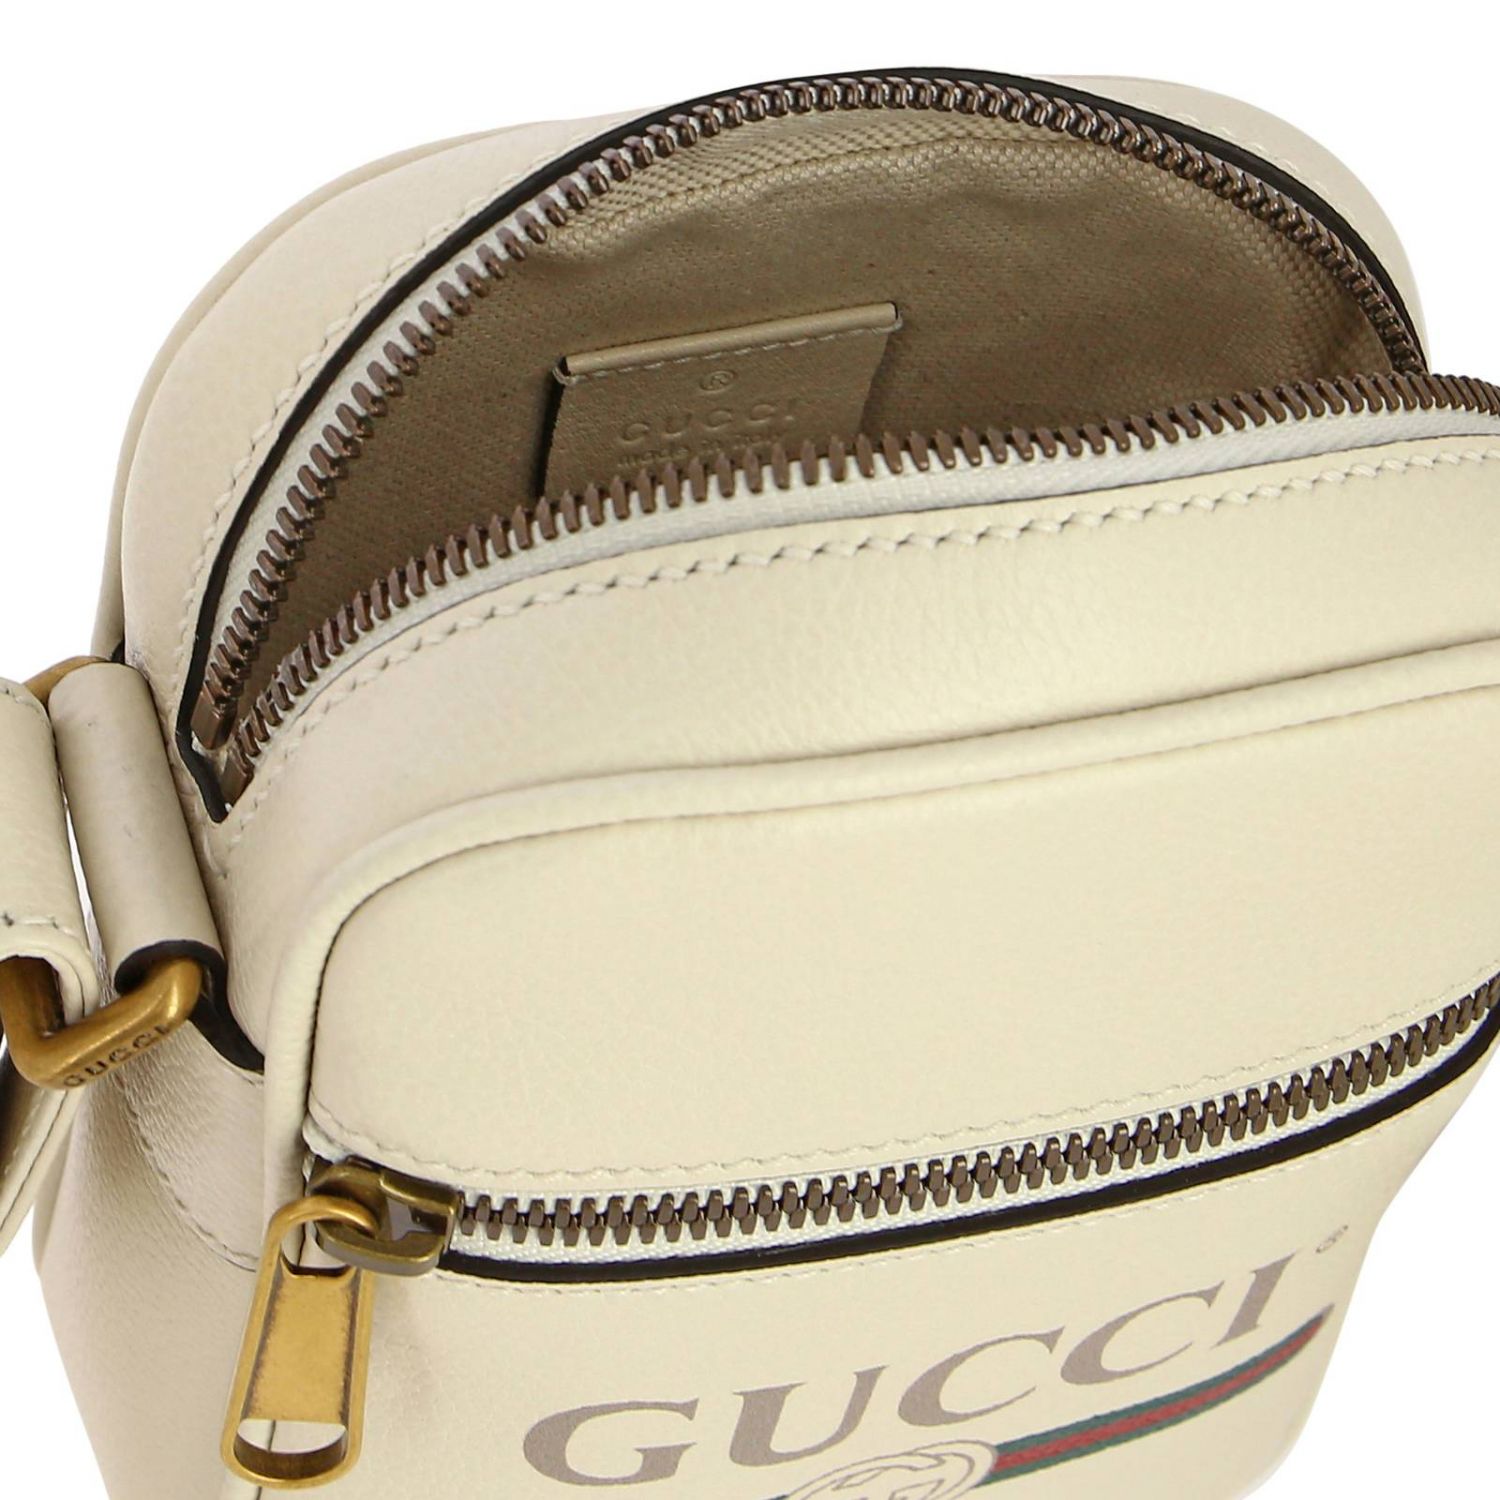 GUCCI: Print bag in hammered leather with Classic print | Mini Bag